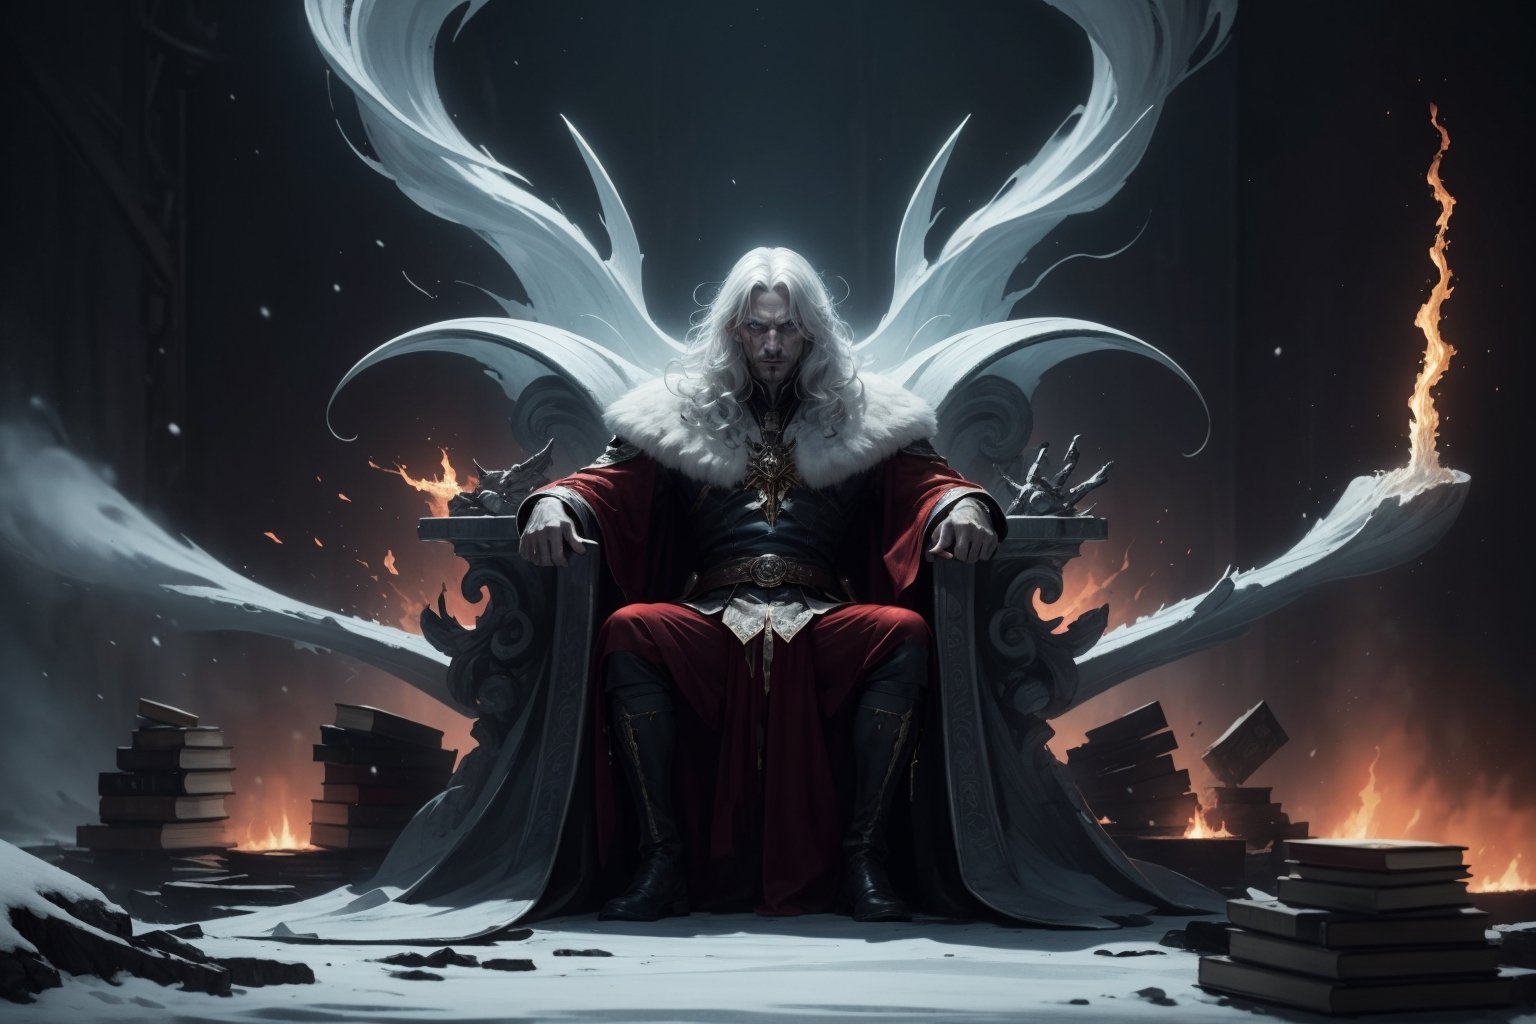 His robes were white as snow, his hair was white like wool. His throne was flaming with fire, its wheels blazing. A river of fire poured out of the throne. Thousands upon thousands served him, tens of thousands attended him. The courtroom was called to order, and the books were opened.,DarkTheme